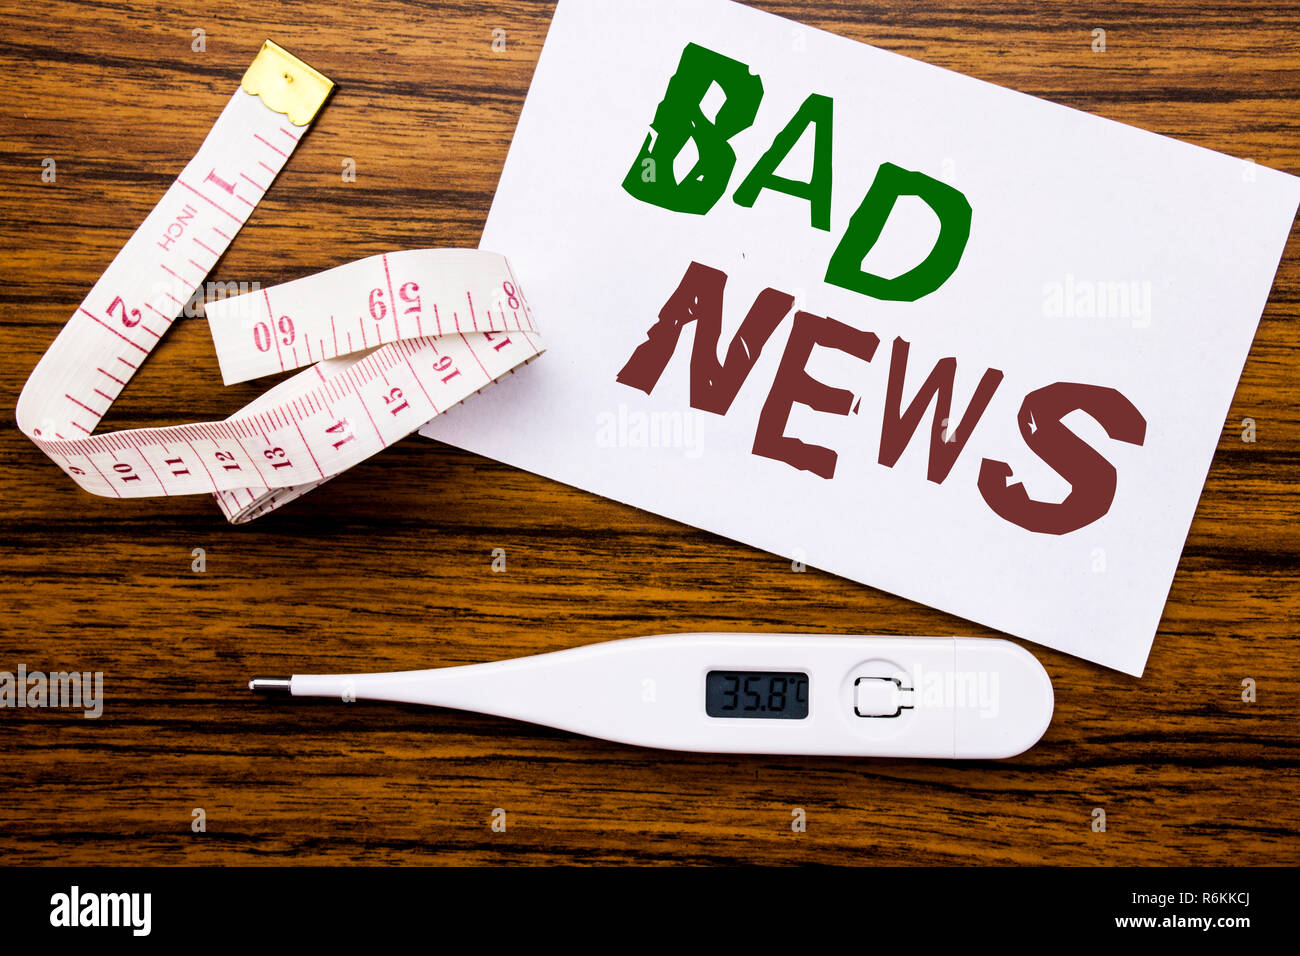 Conceptual hand writing text caption showing Bad News. Business concept for Failure Media Newspaper written on sticky note paper on wood background. Meter and thermometer for fitness subject. Stock Photo